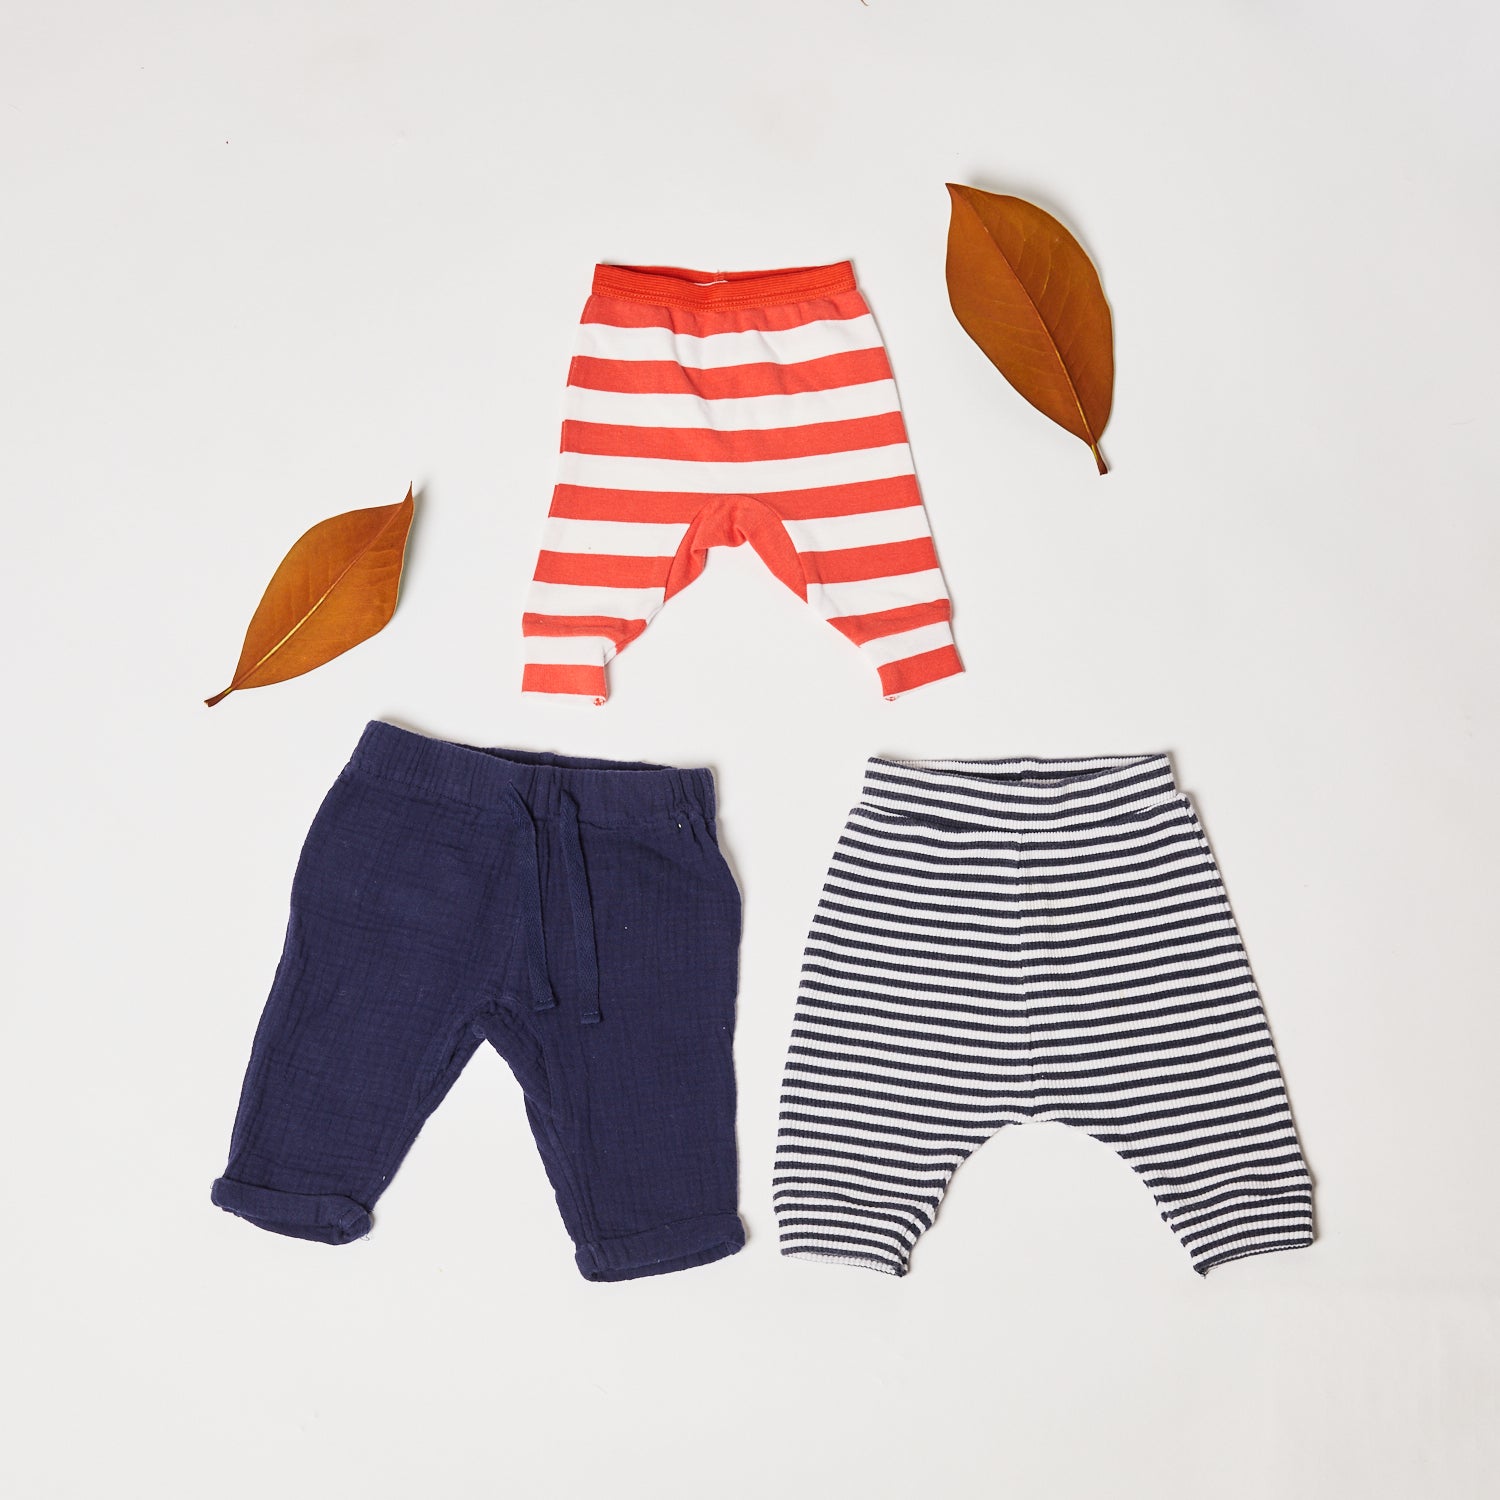 COUNTRY ROAD 3 PIECE BUNDLE, 0-3 MONTHS